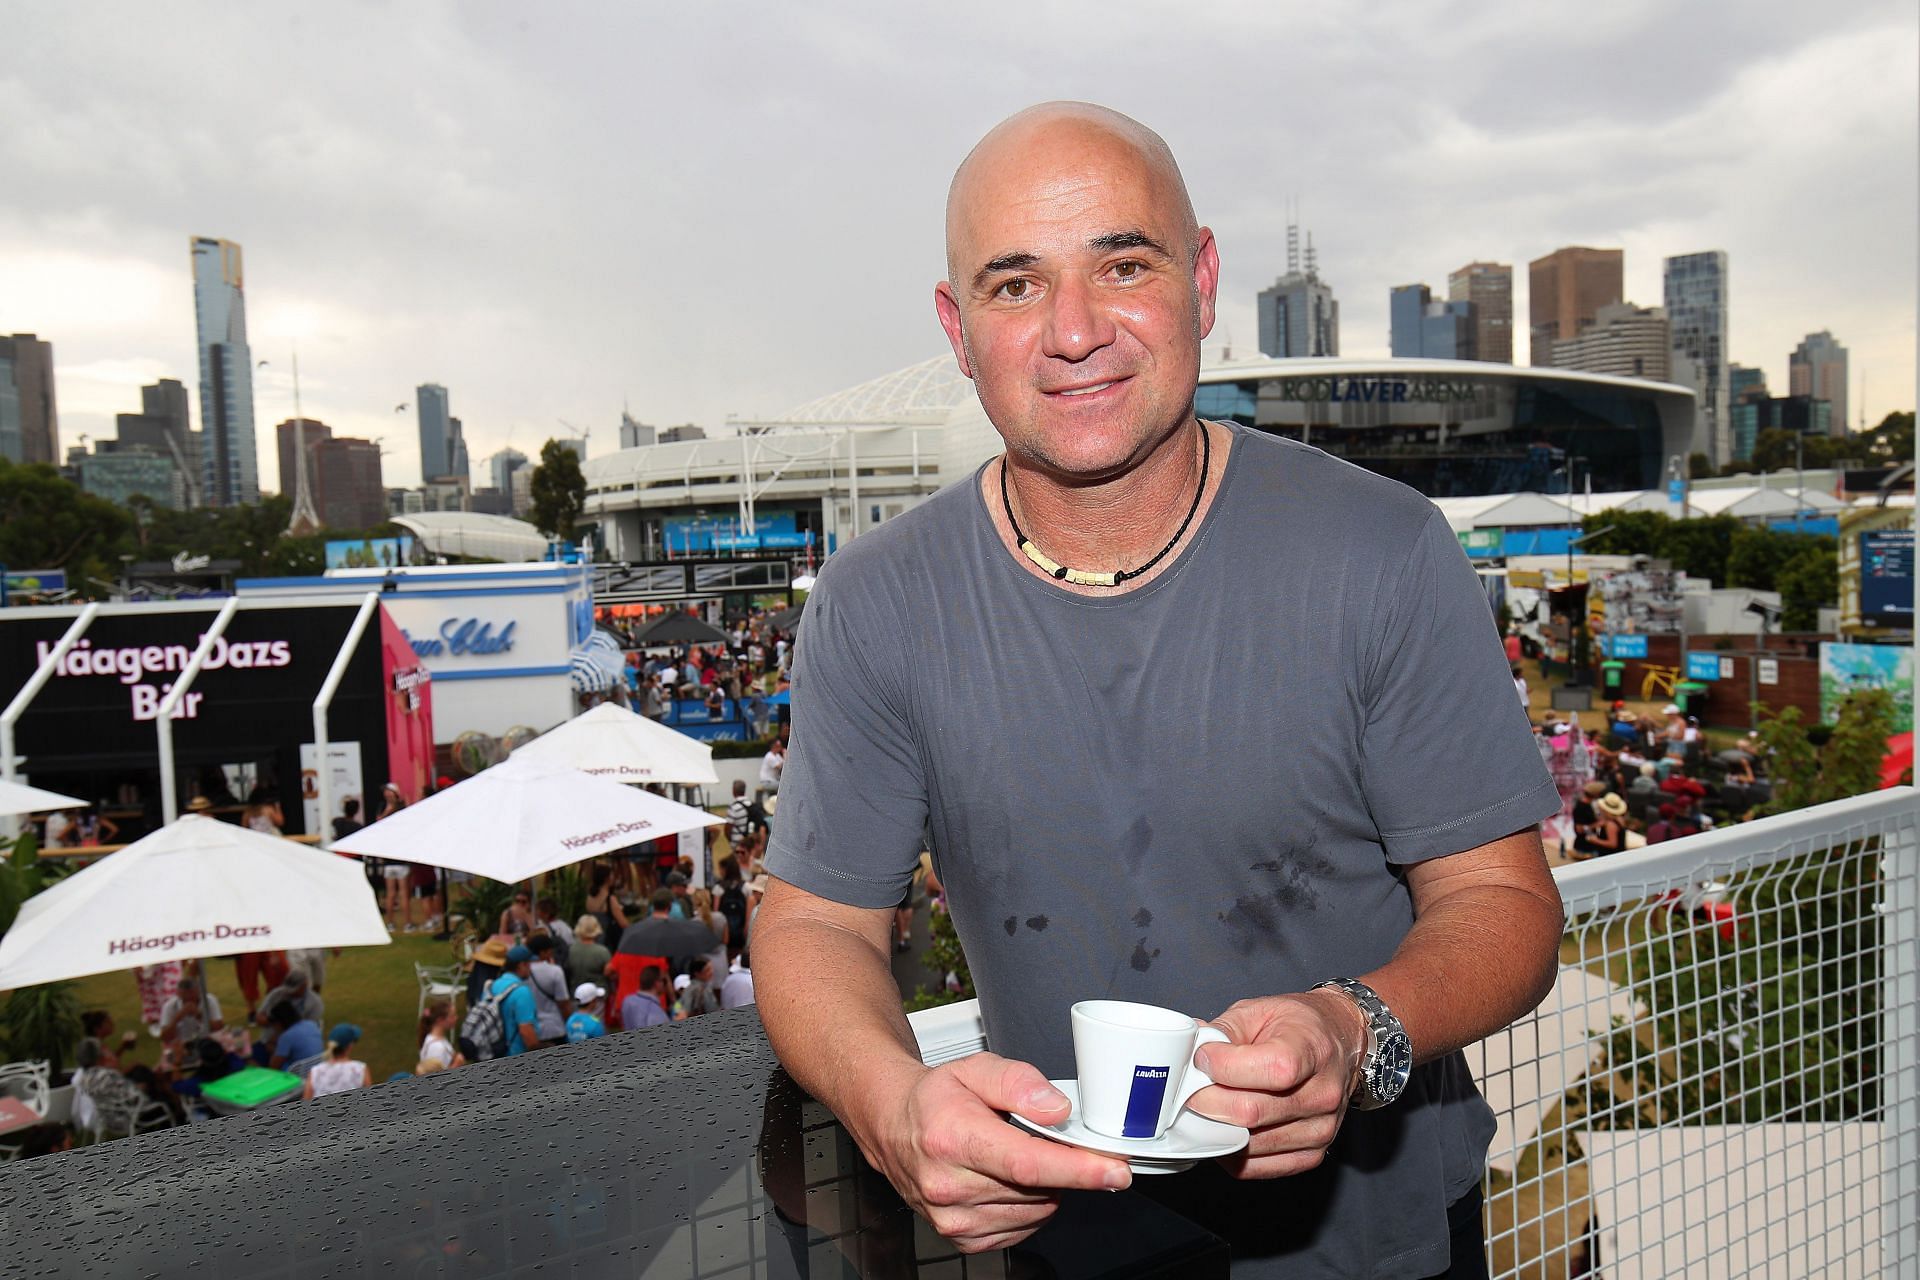 I andre agassi sneakers was borderline stalking her" - When Andre Agassi talked about